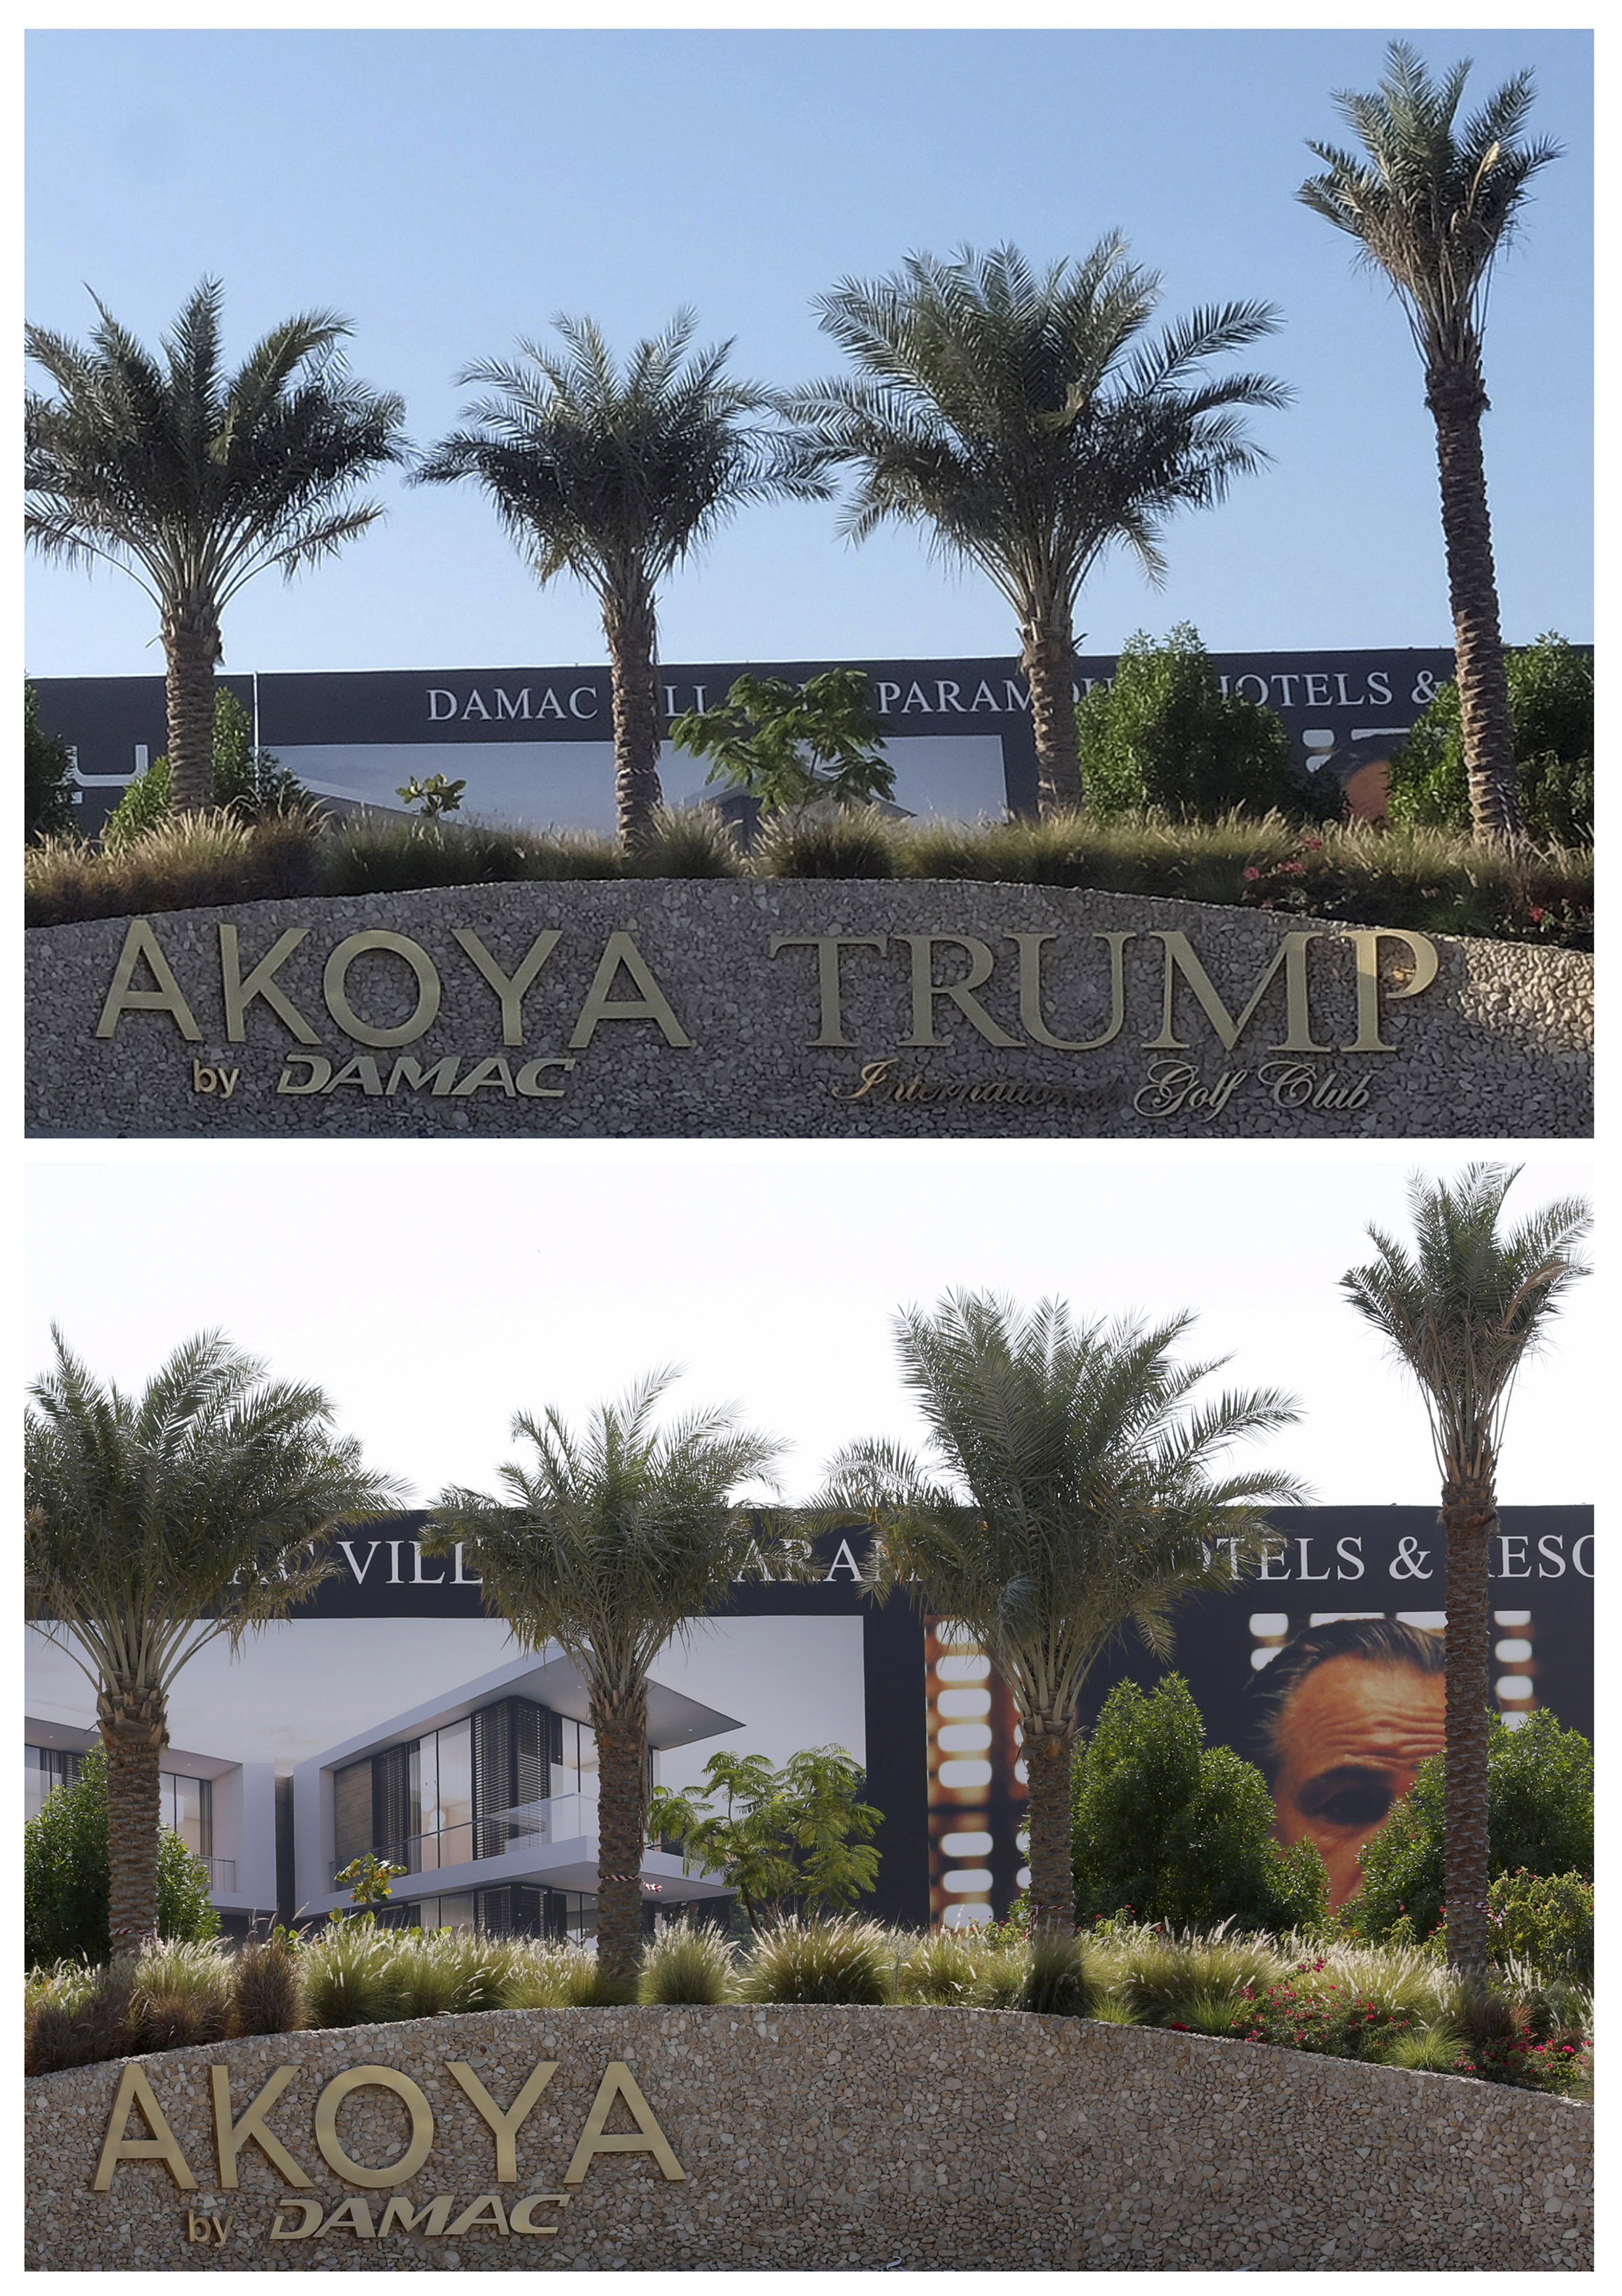 Before and after of removal of the Trump International Golf Club portion at the AKOYA by DAMAC development in Dubai on Dec. 10, 2015. (Ahmed Jadallah—Reuters)